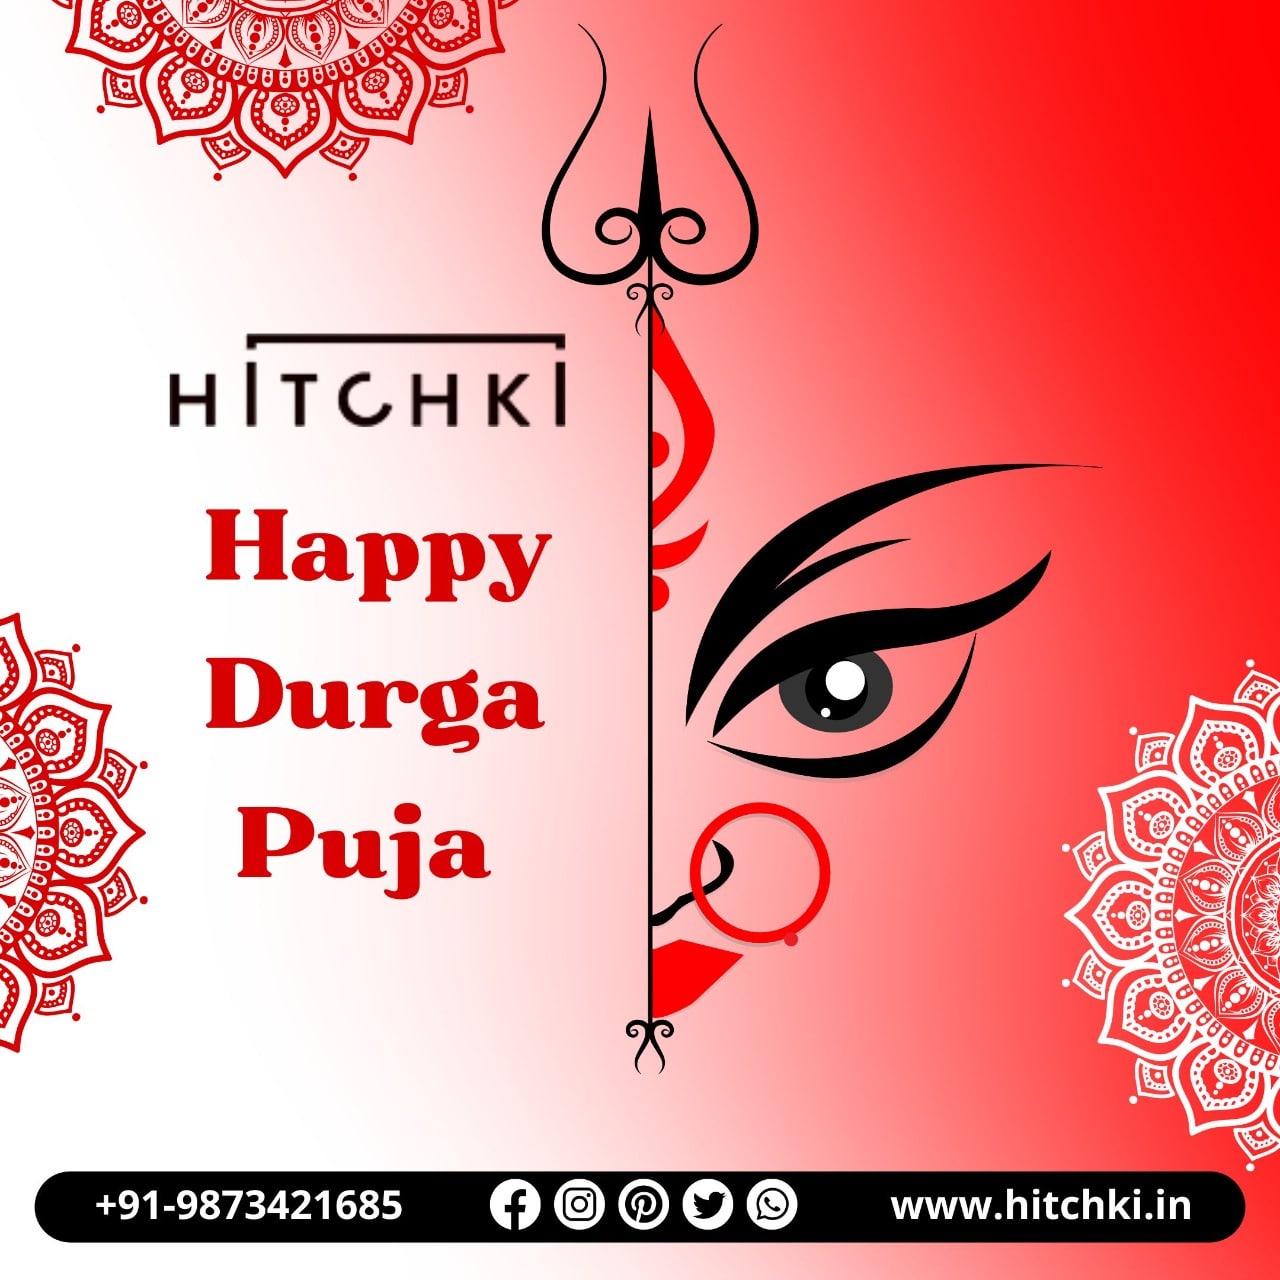 Establish Your Identity and Contest the Transformed Artistry of Durga Puja